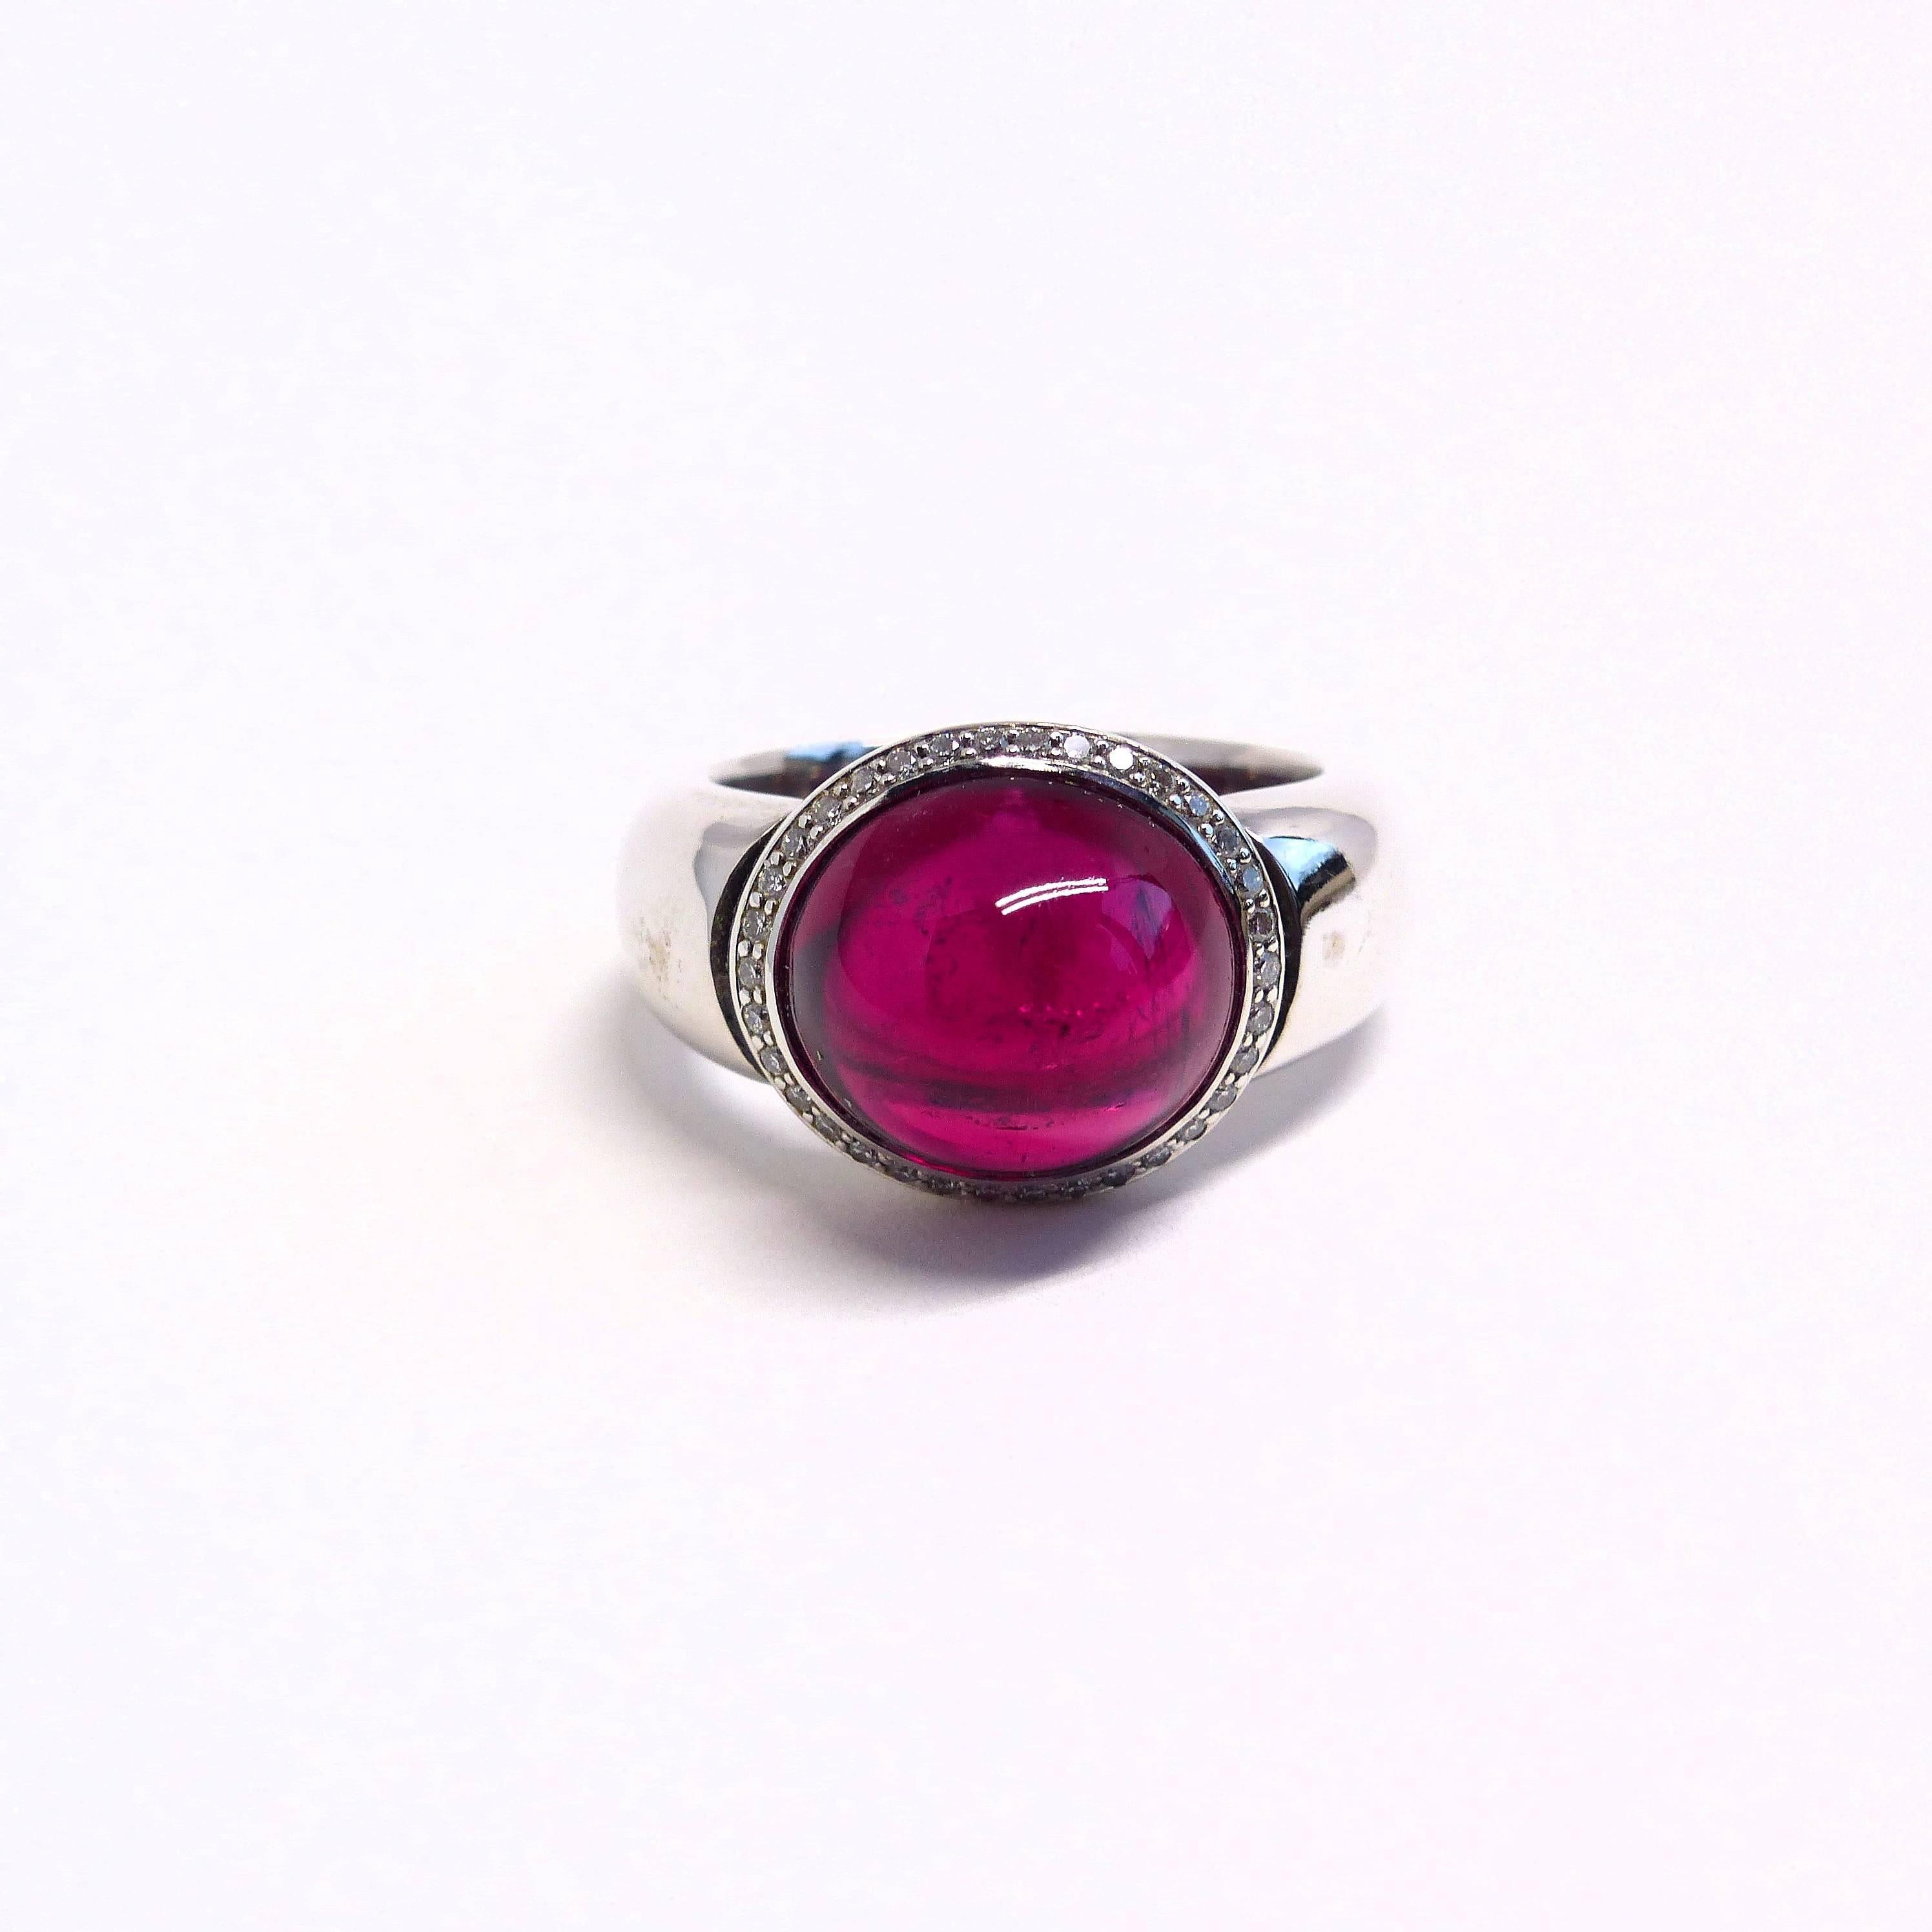 Thomas Leyser is renowned for his contemporary jewellery designs utilizing fine gemstones. 

This 18k white gold ring (18.25g) with 1x fine Rubelite Cabouchon (oval, 13x12mm, 10.59ct) + 24x Diamonds (brillant-cut, 1mm, G/VS). 

Ringsize 7 3/4 (56.5)